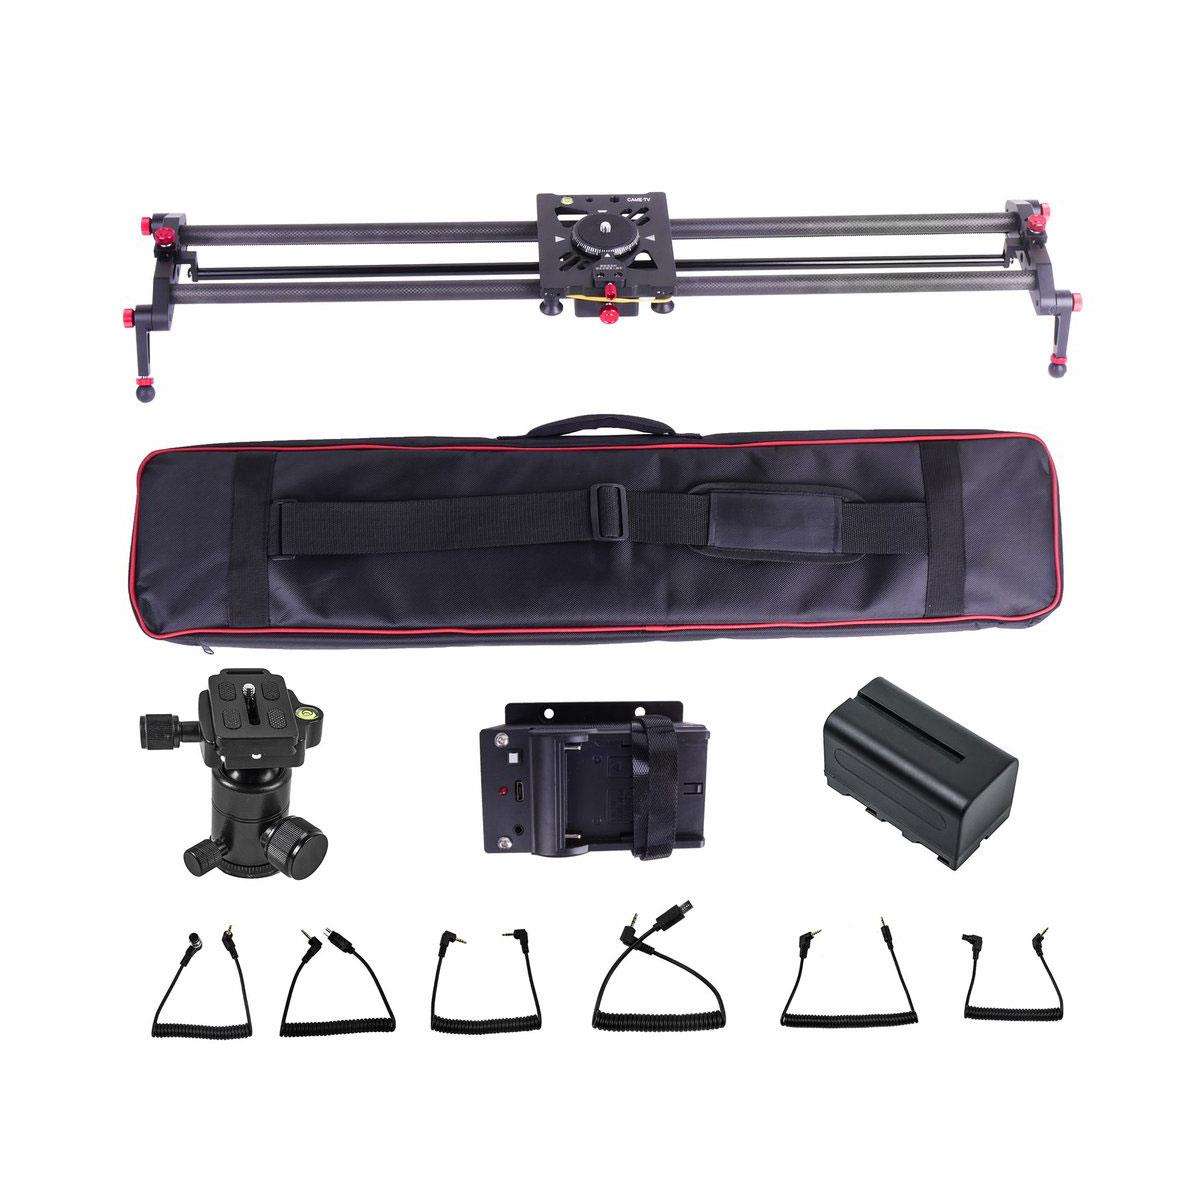 

Came-TV 120cm Motorized Parallax Slider with Bluetooth